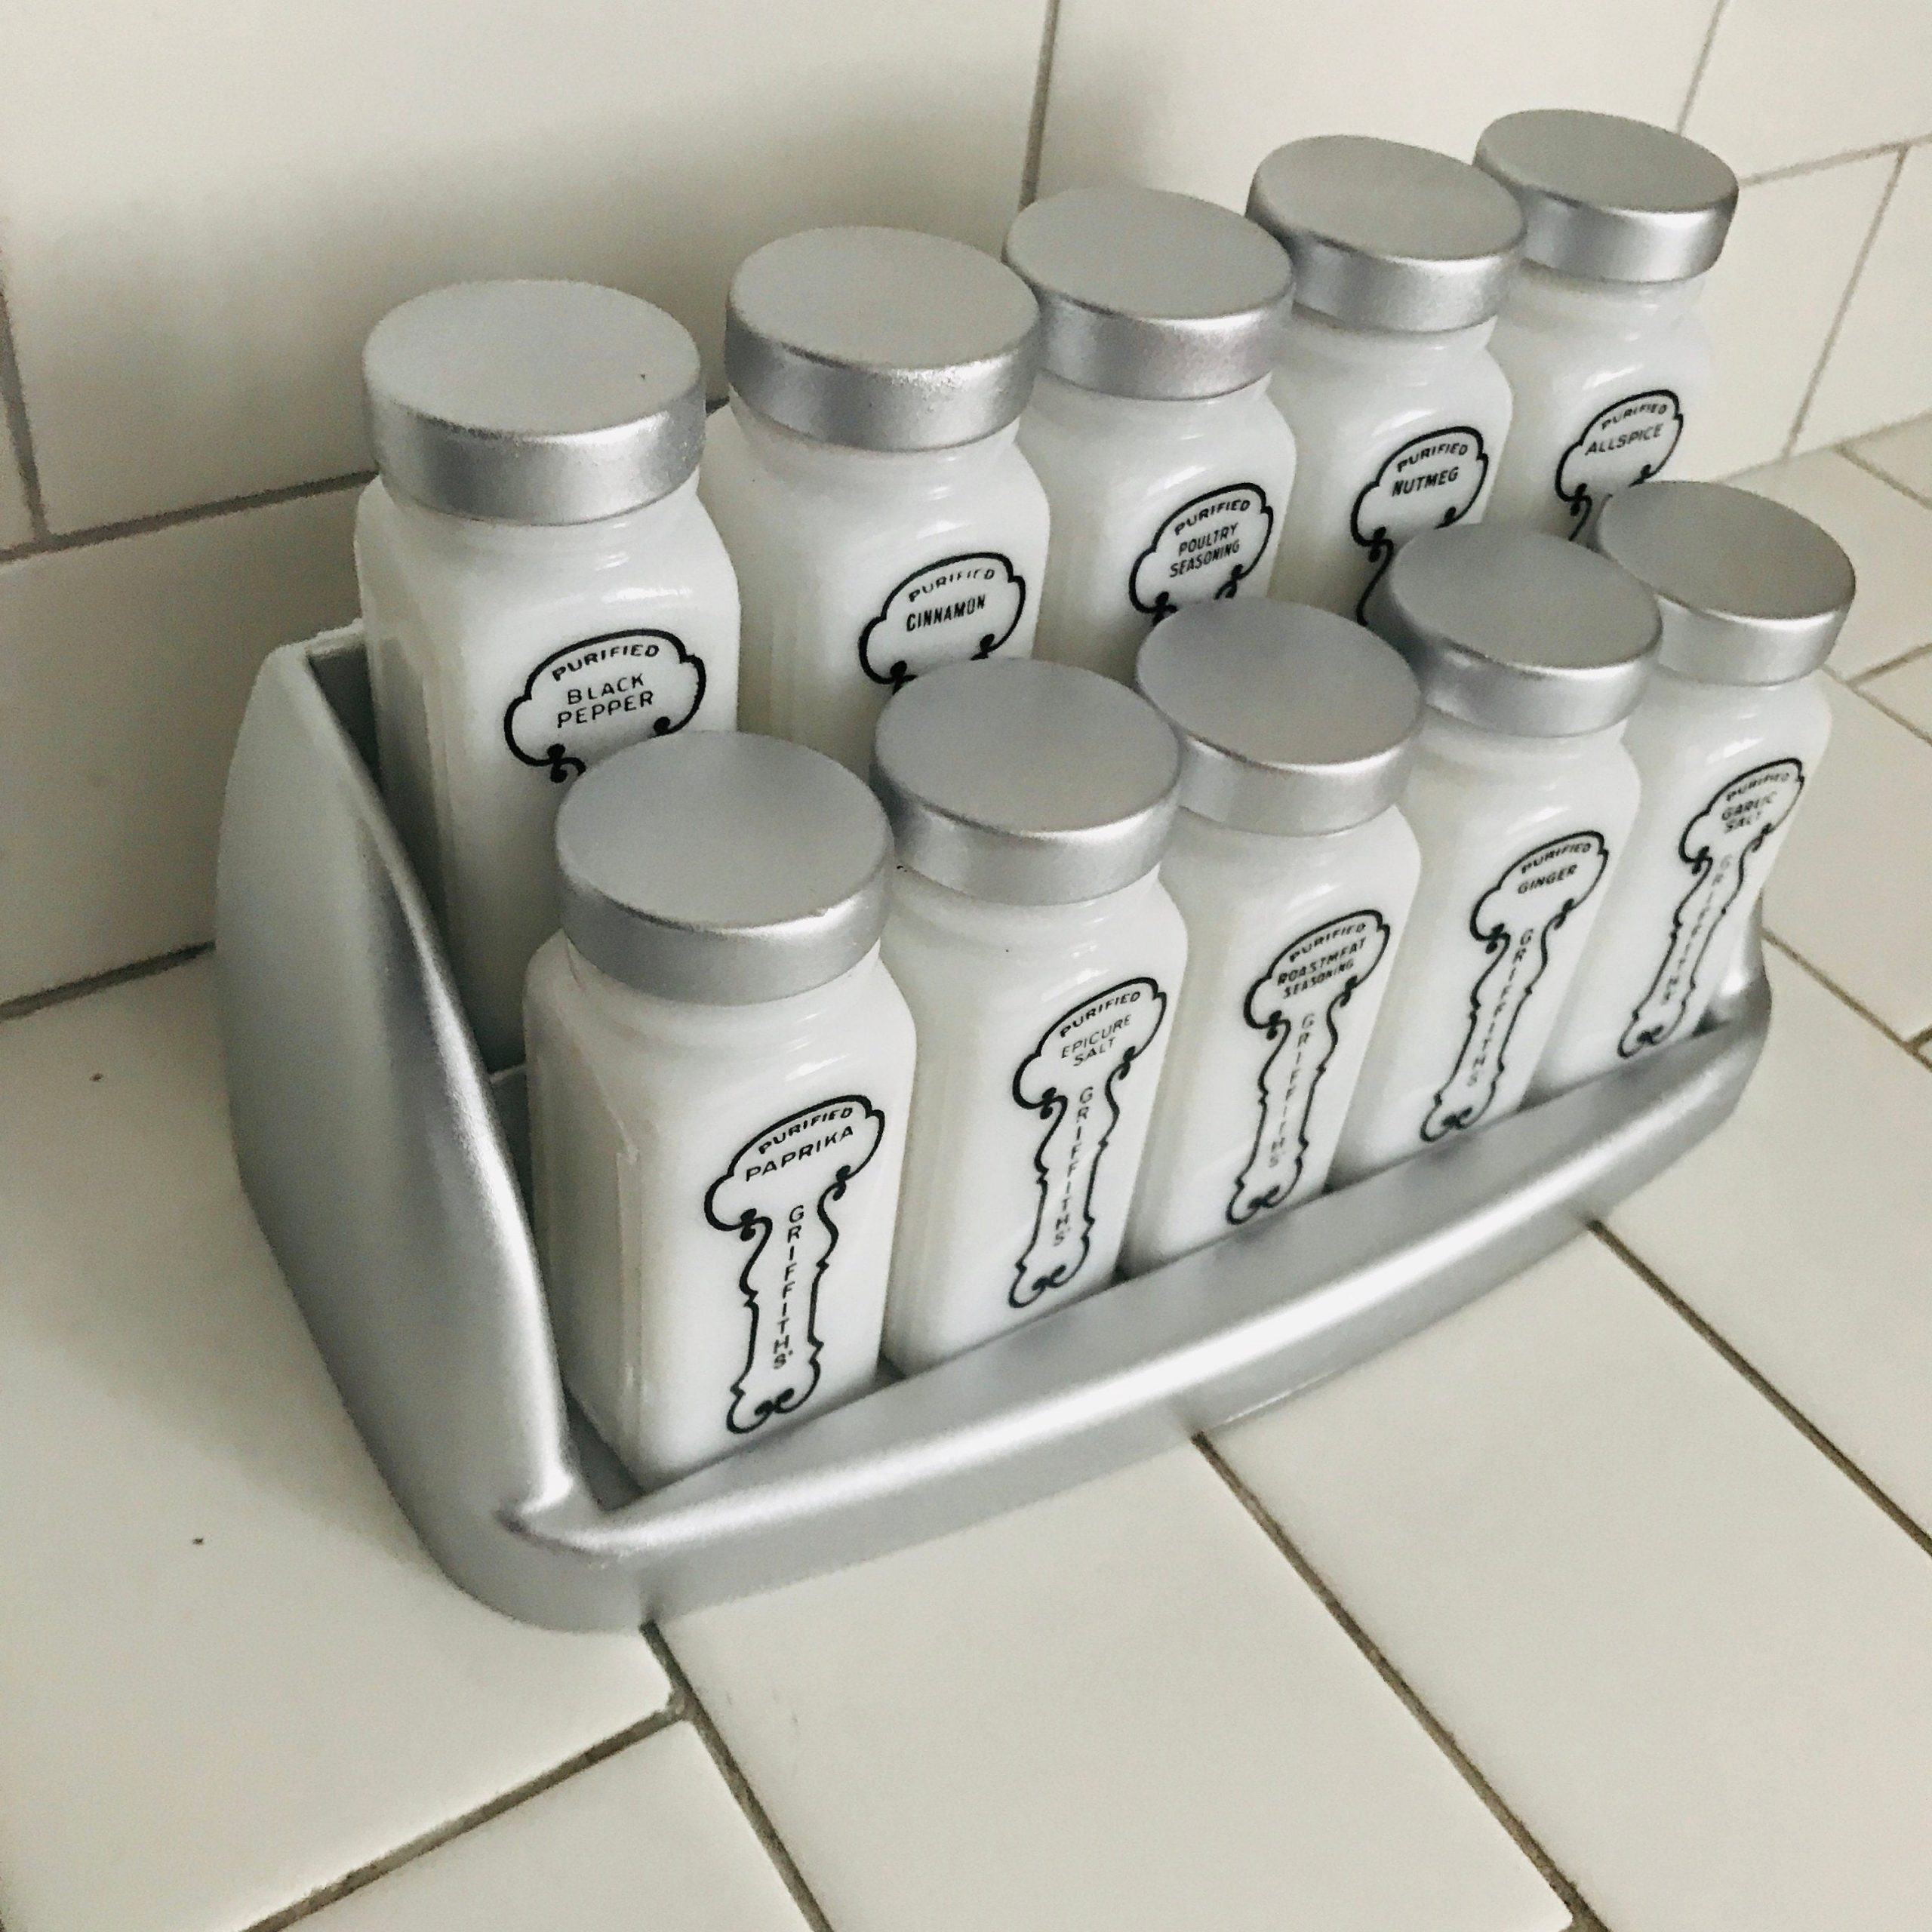 https://www.truevintageantiques.com/wp-content/uploads/2020/06/vintage-1950s-milk-glass-spice-jars-spices-rack-with-10-griffiiths-chrome-color-lids-rack-farmhouse-collectible-display-retro-kitchen-5ee000845-scaled.jpg